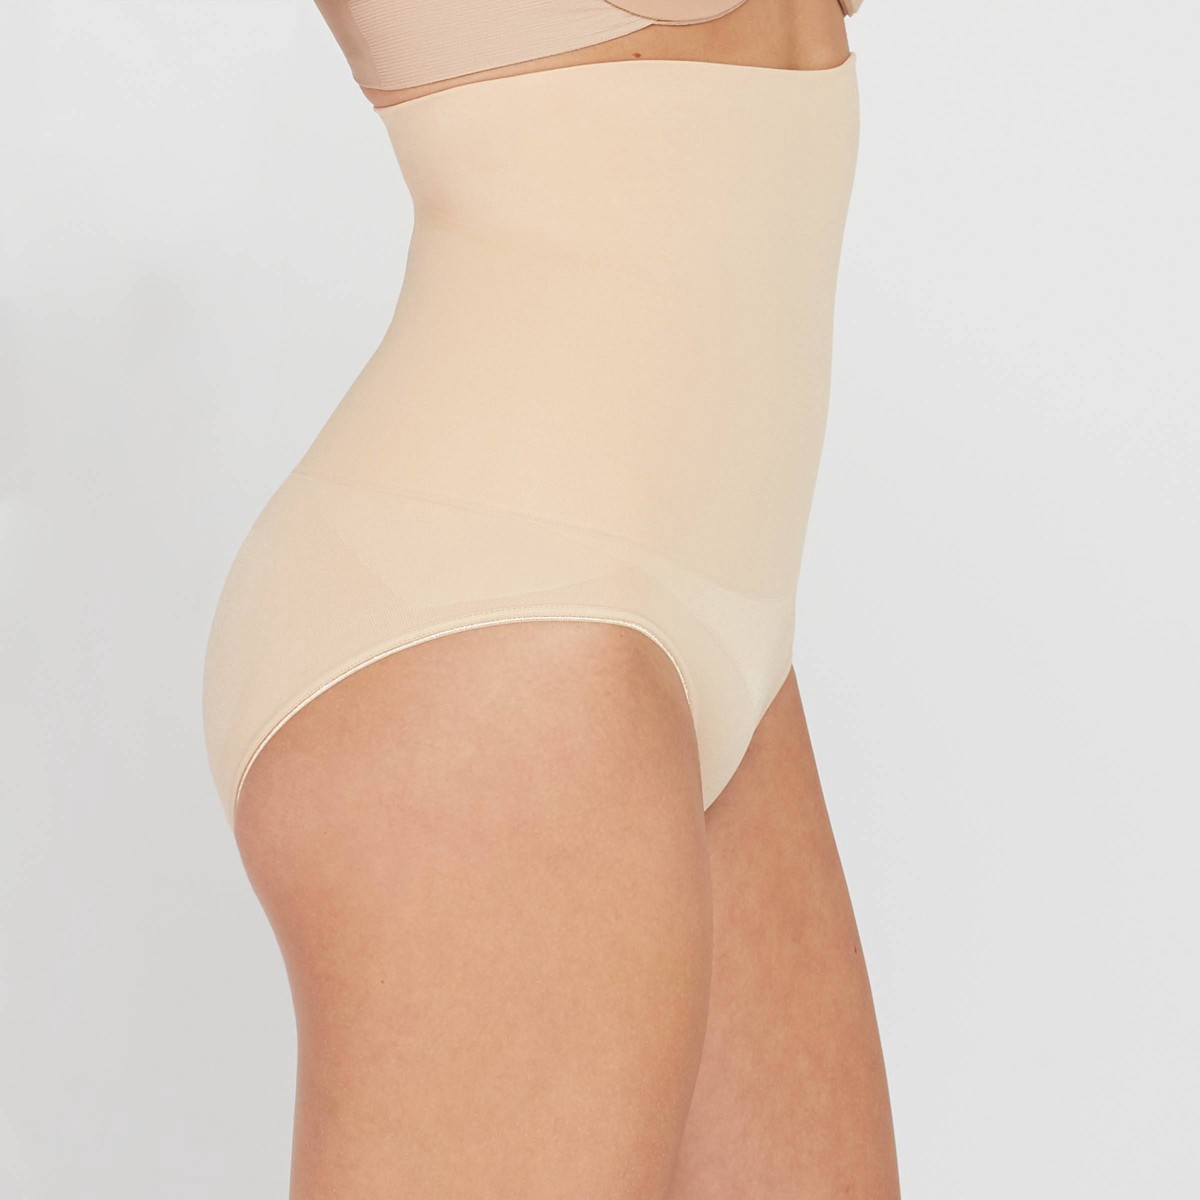 slide 3 of 3, ASSETS by Spanx Women's Remarkable Results High Waist Control Brief - Light Beige L, 1 ct